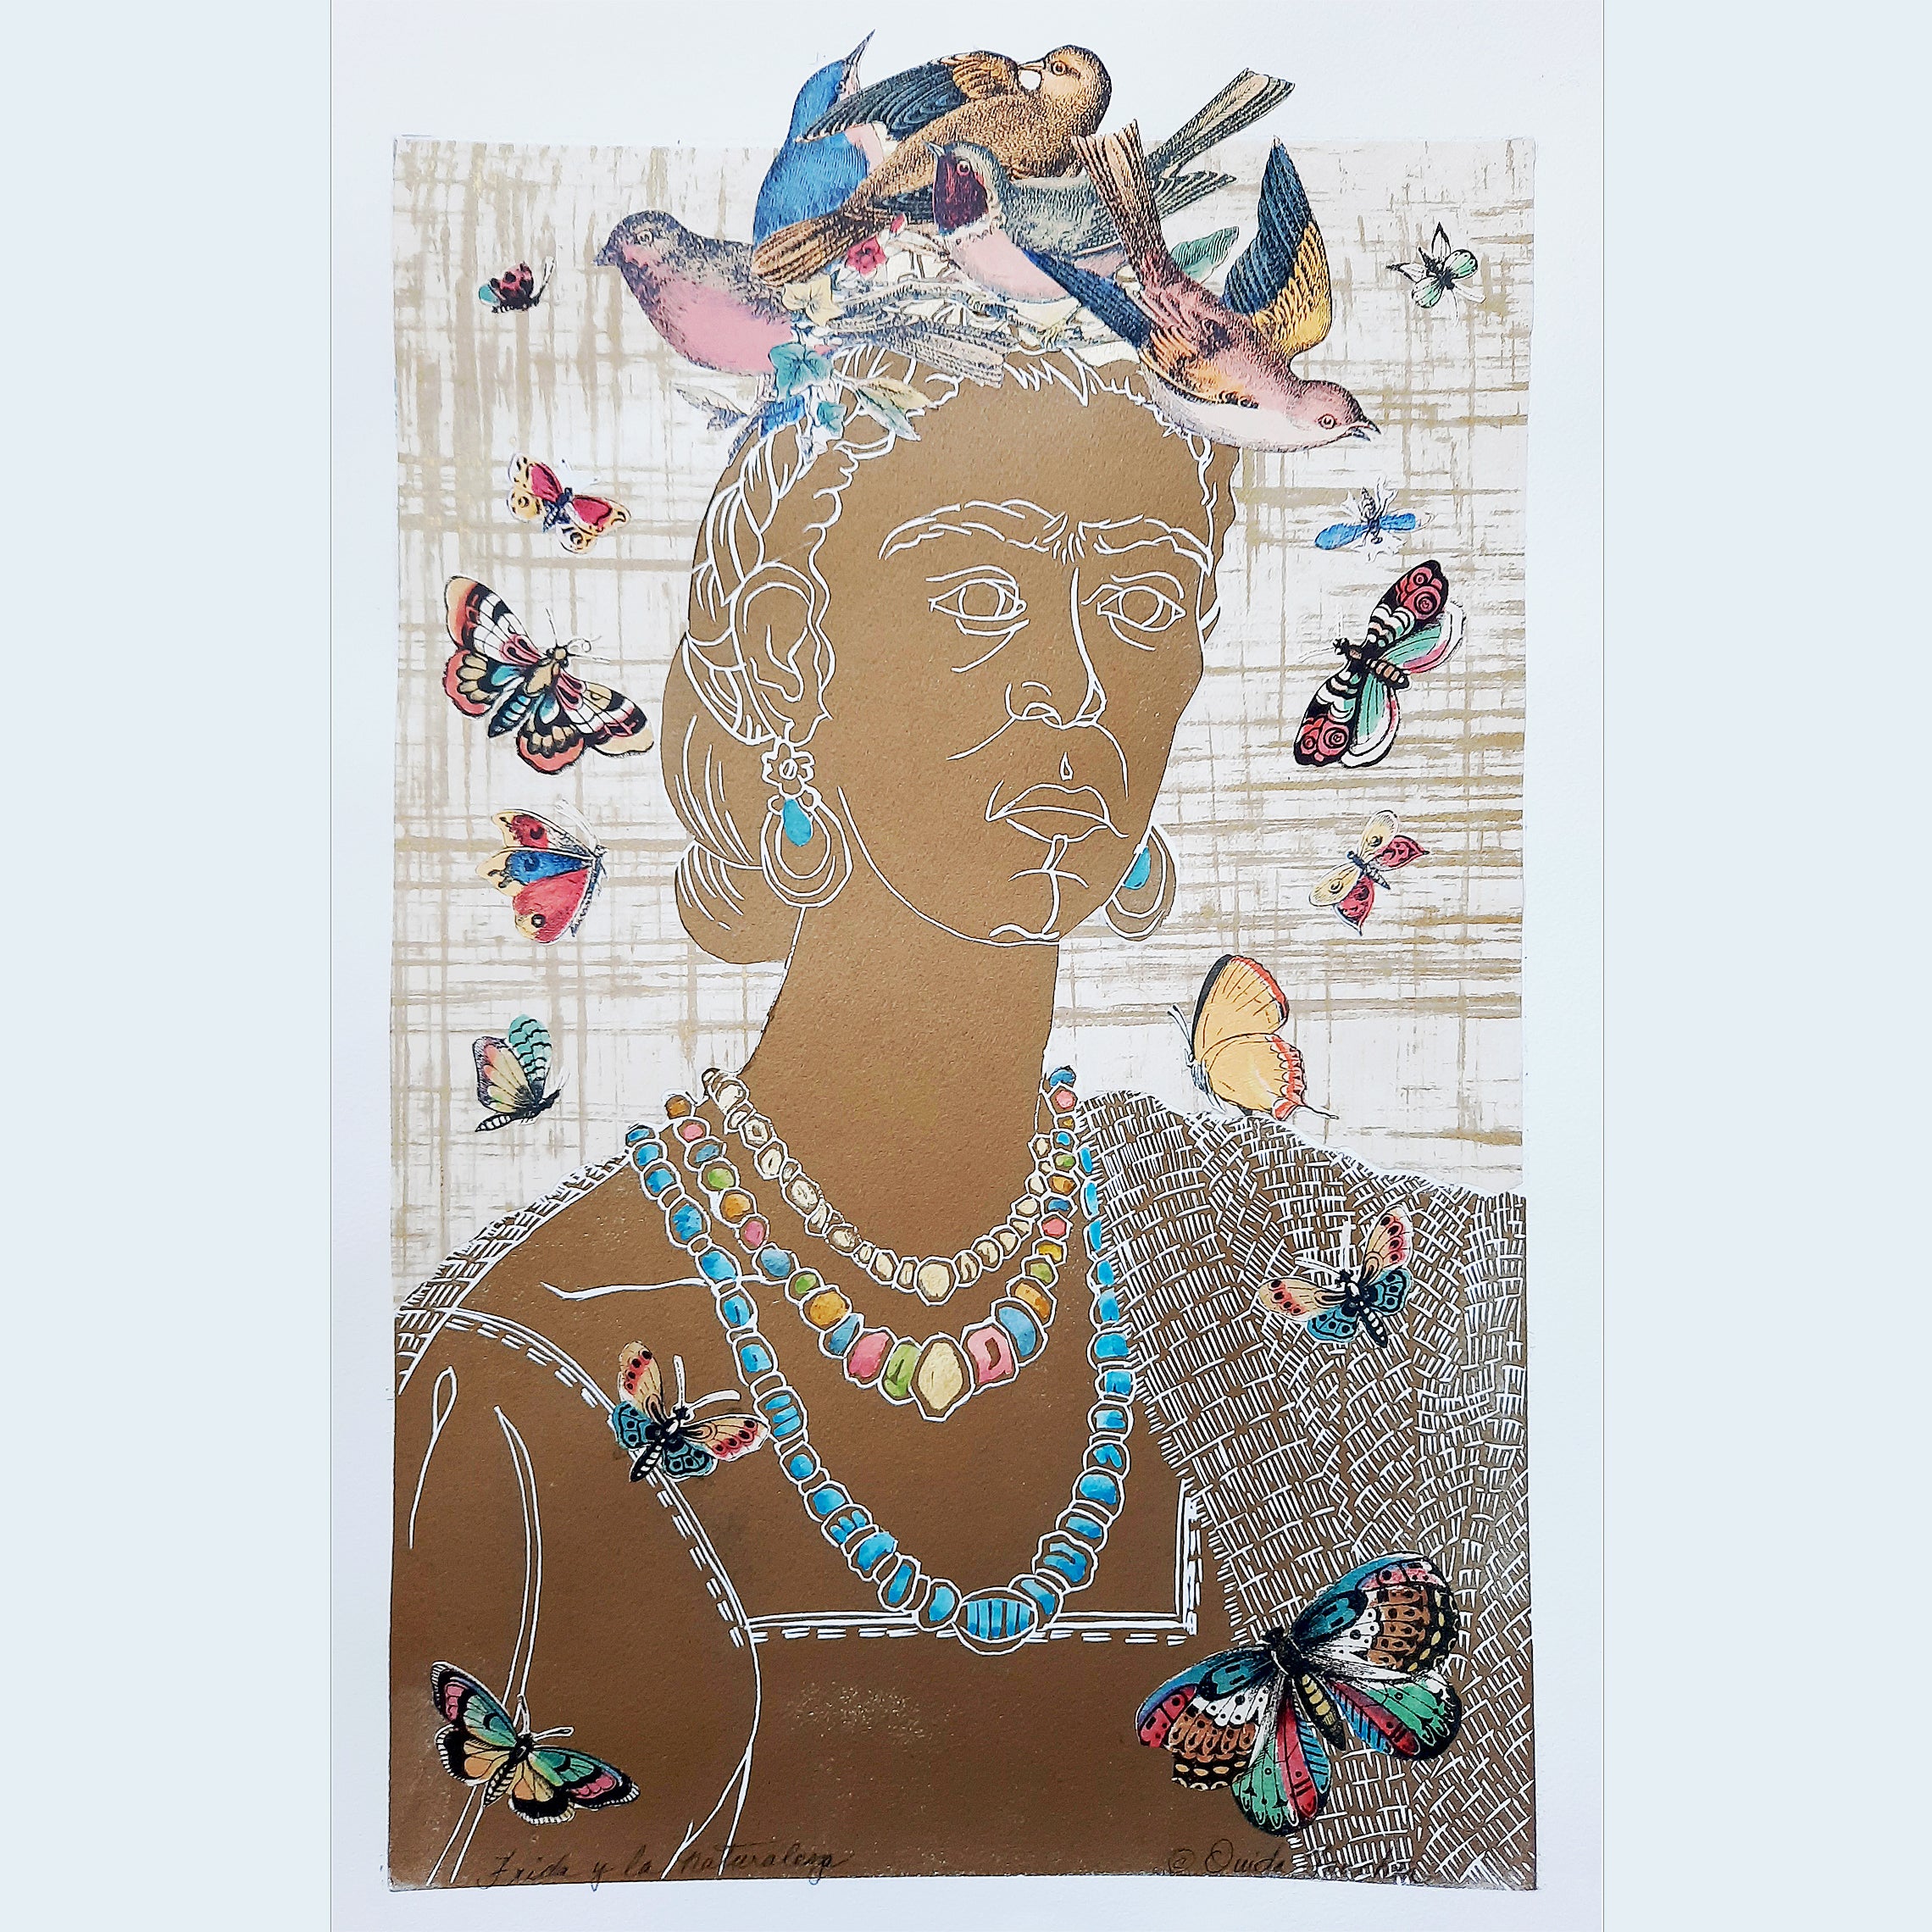 Frida y la Naturaleza, original artwork hand printed in gold ink, with songbirds and butterflies, for sale by Ouida Touchon